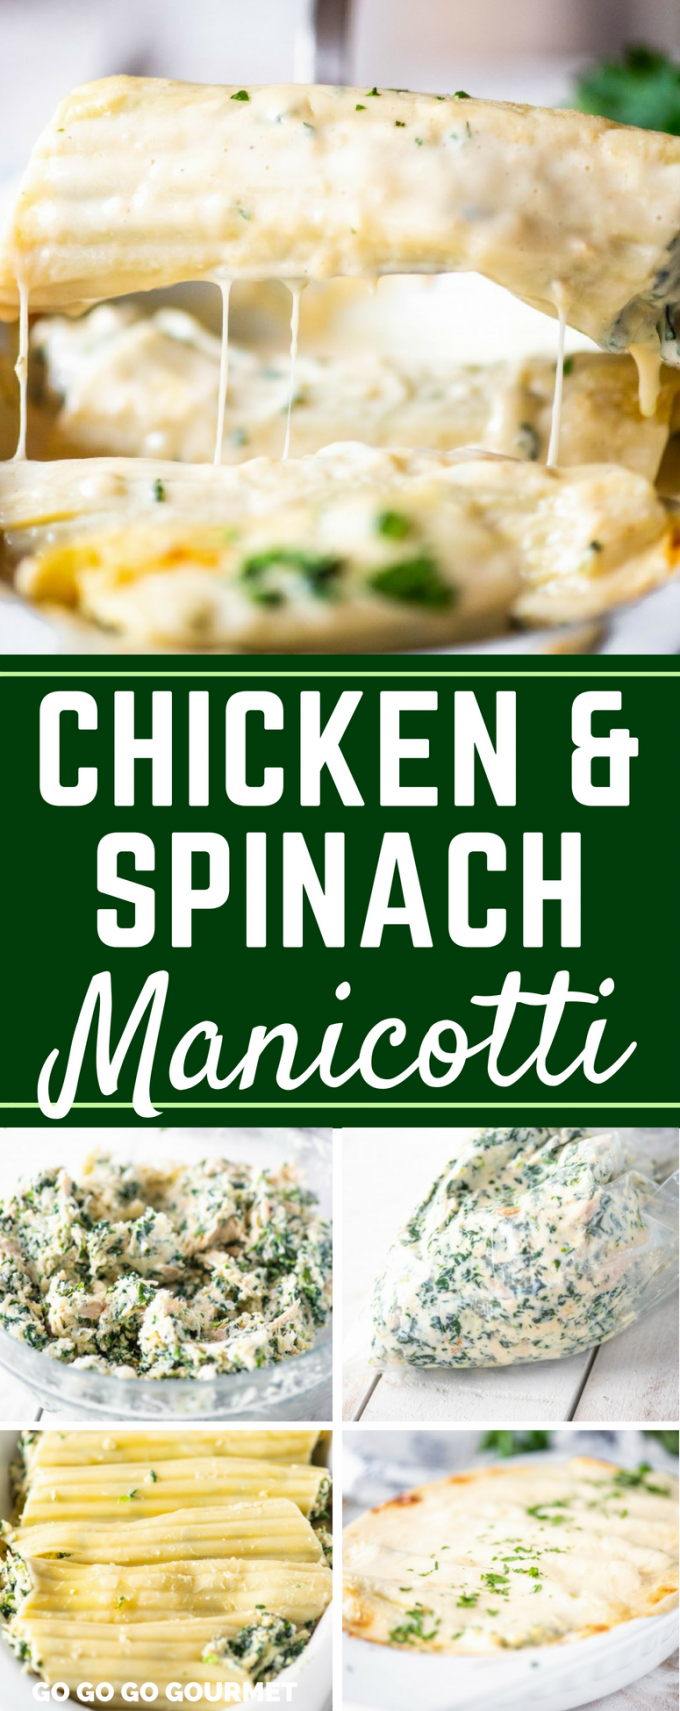 This is the best easy Chicken and Spinach Manicotti recipe. Stuffed with ricotta cheese and spices, and then topped with a creamy alfredo sauce, it's an Italian dish that just can't be beat! #chickenmanicotti #olivegardenalfredo #easyweeknightdinner #chickenandspinachmanicotti #gogogogourmet via @gogogogourmet